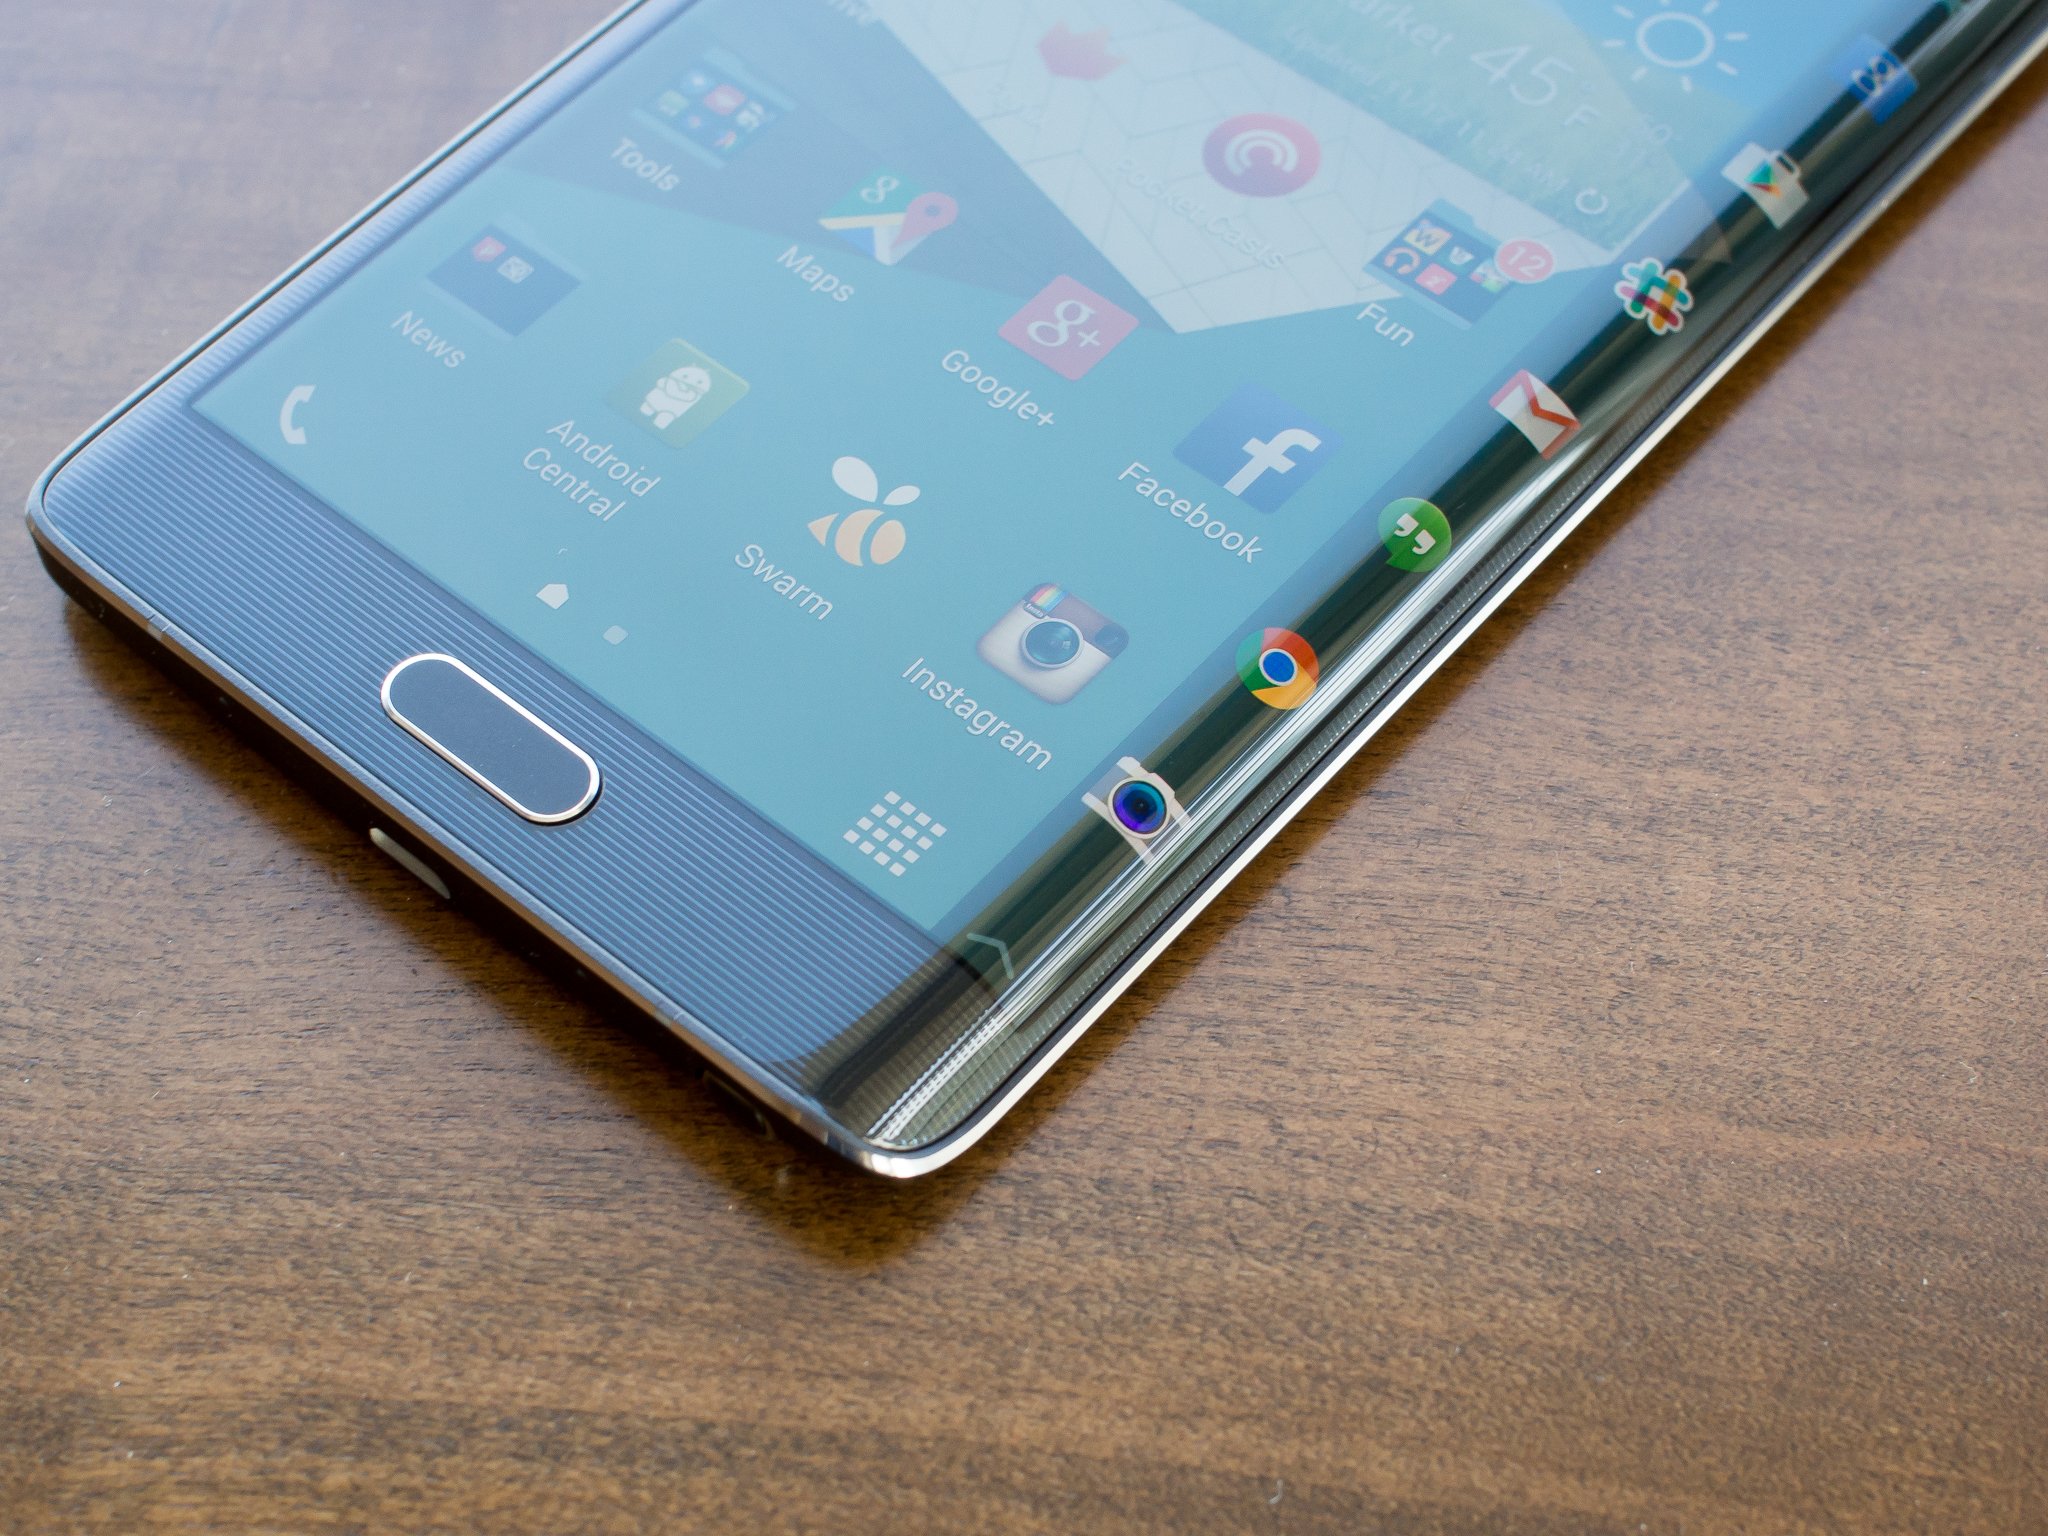 Samsung Galaxy Note Edge on table